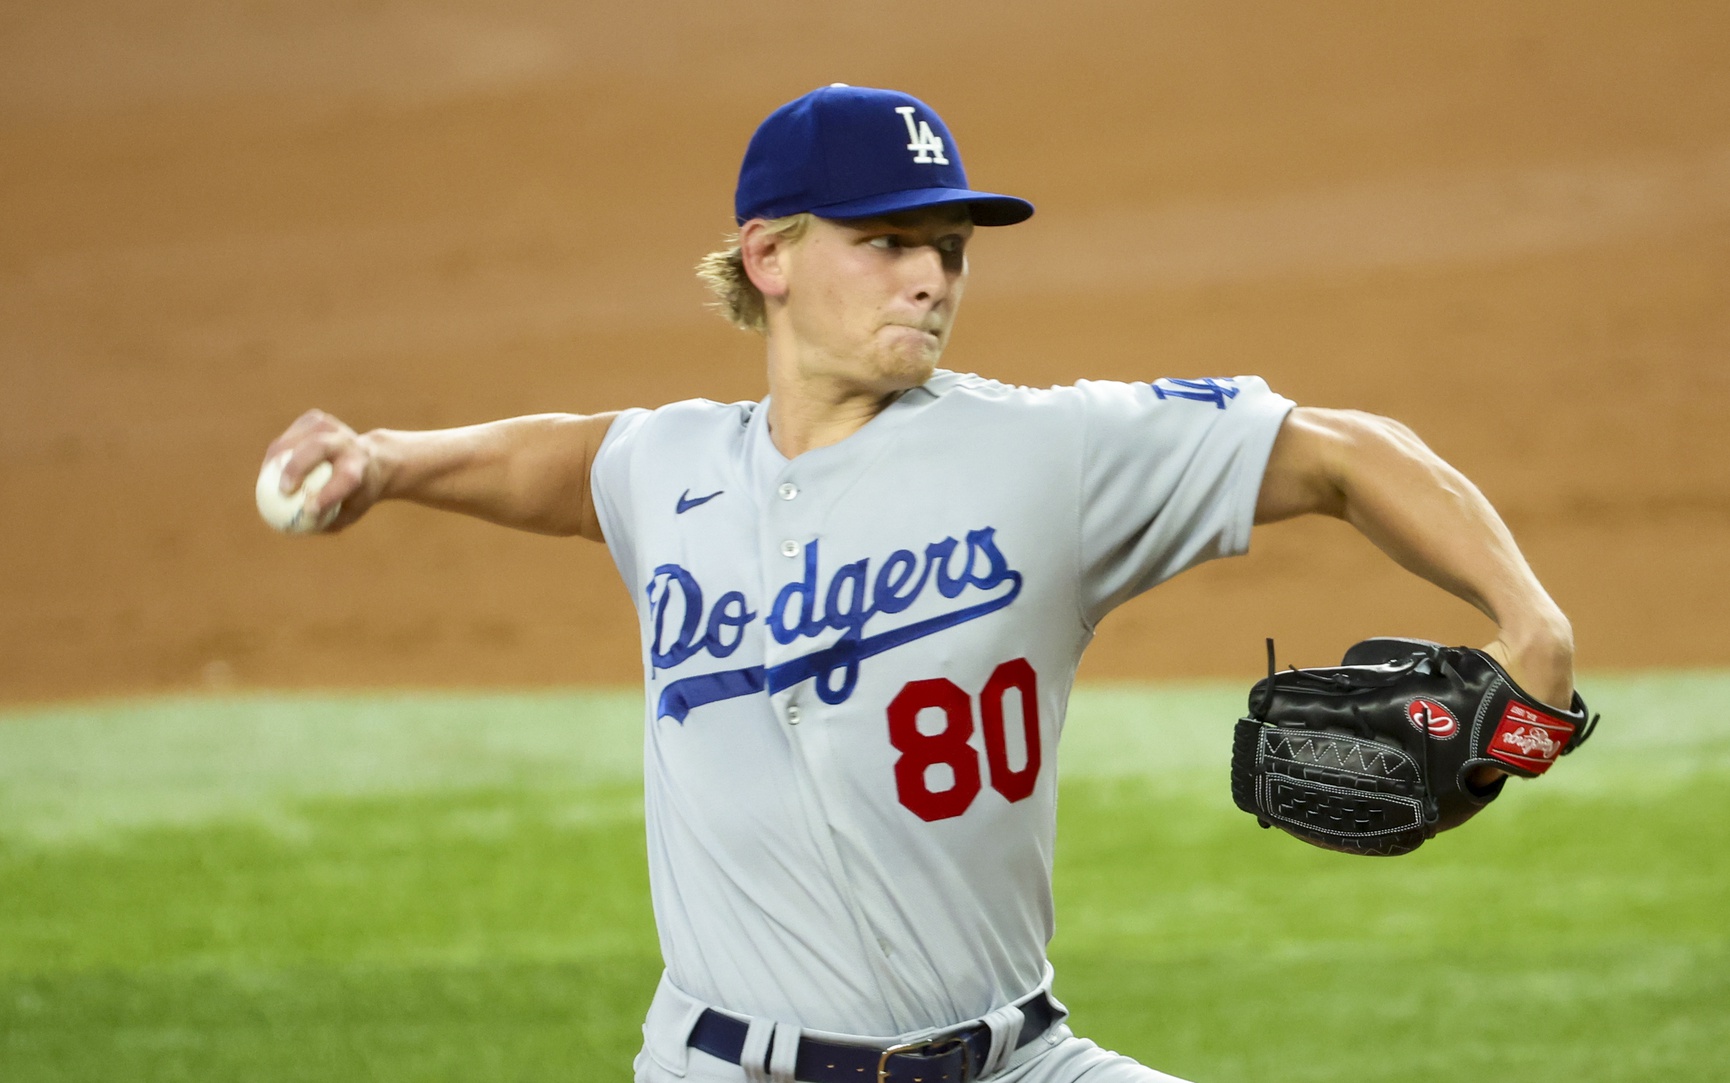 Dodgers fail to sweep Rangers with 8-4 loss